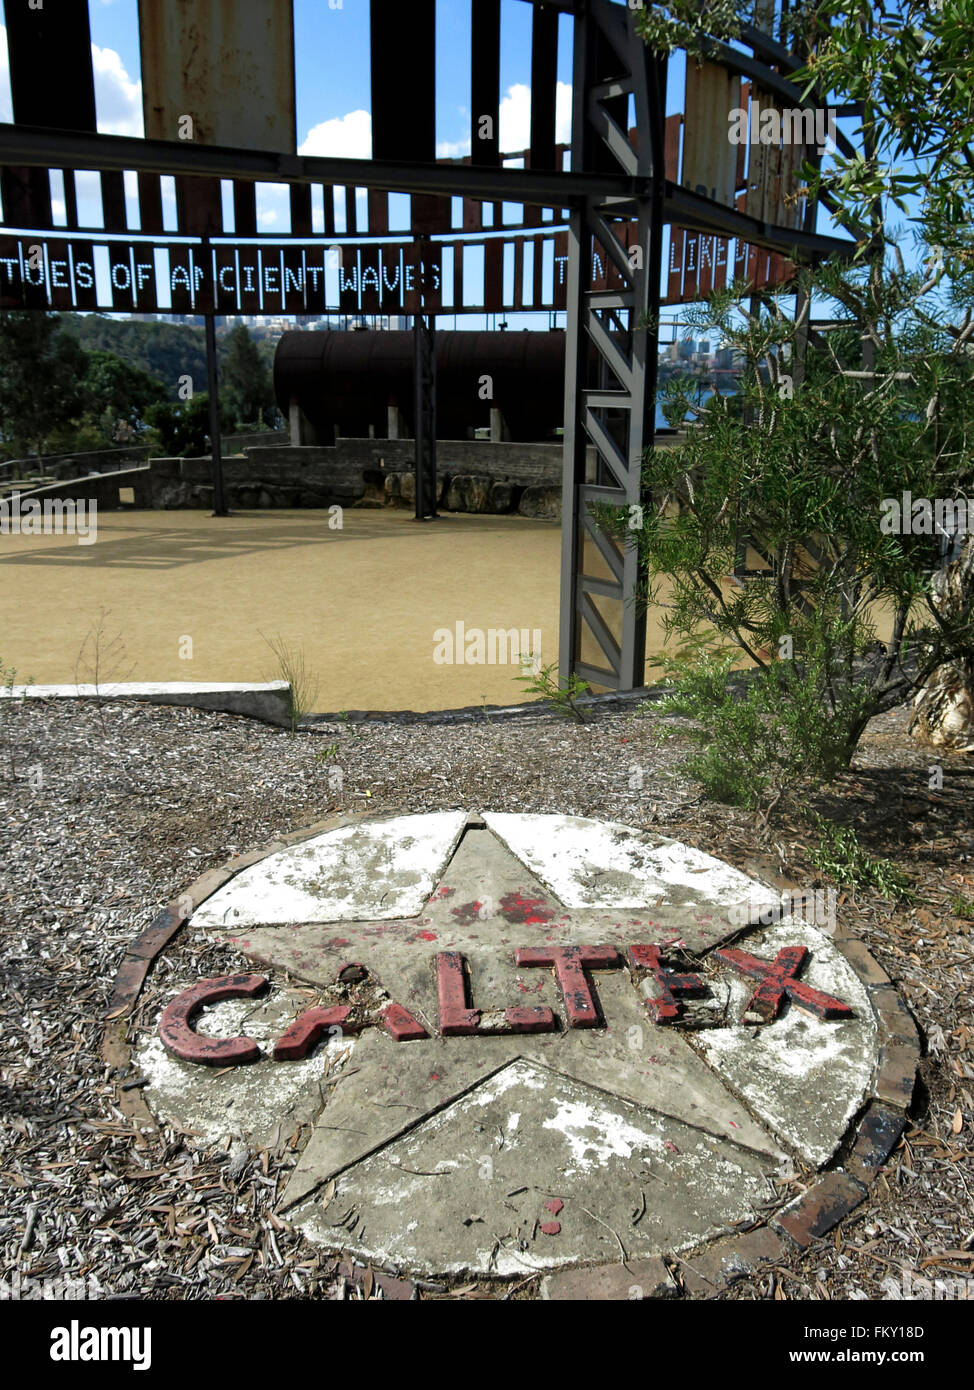 The Caltex Oil Co. logo in the former BP site at Waverton, Sydney, Colour, vertical Stock Photo